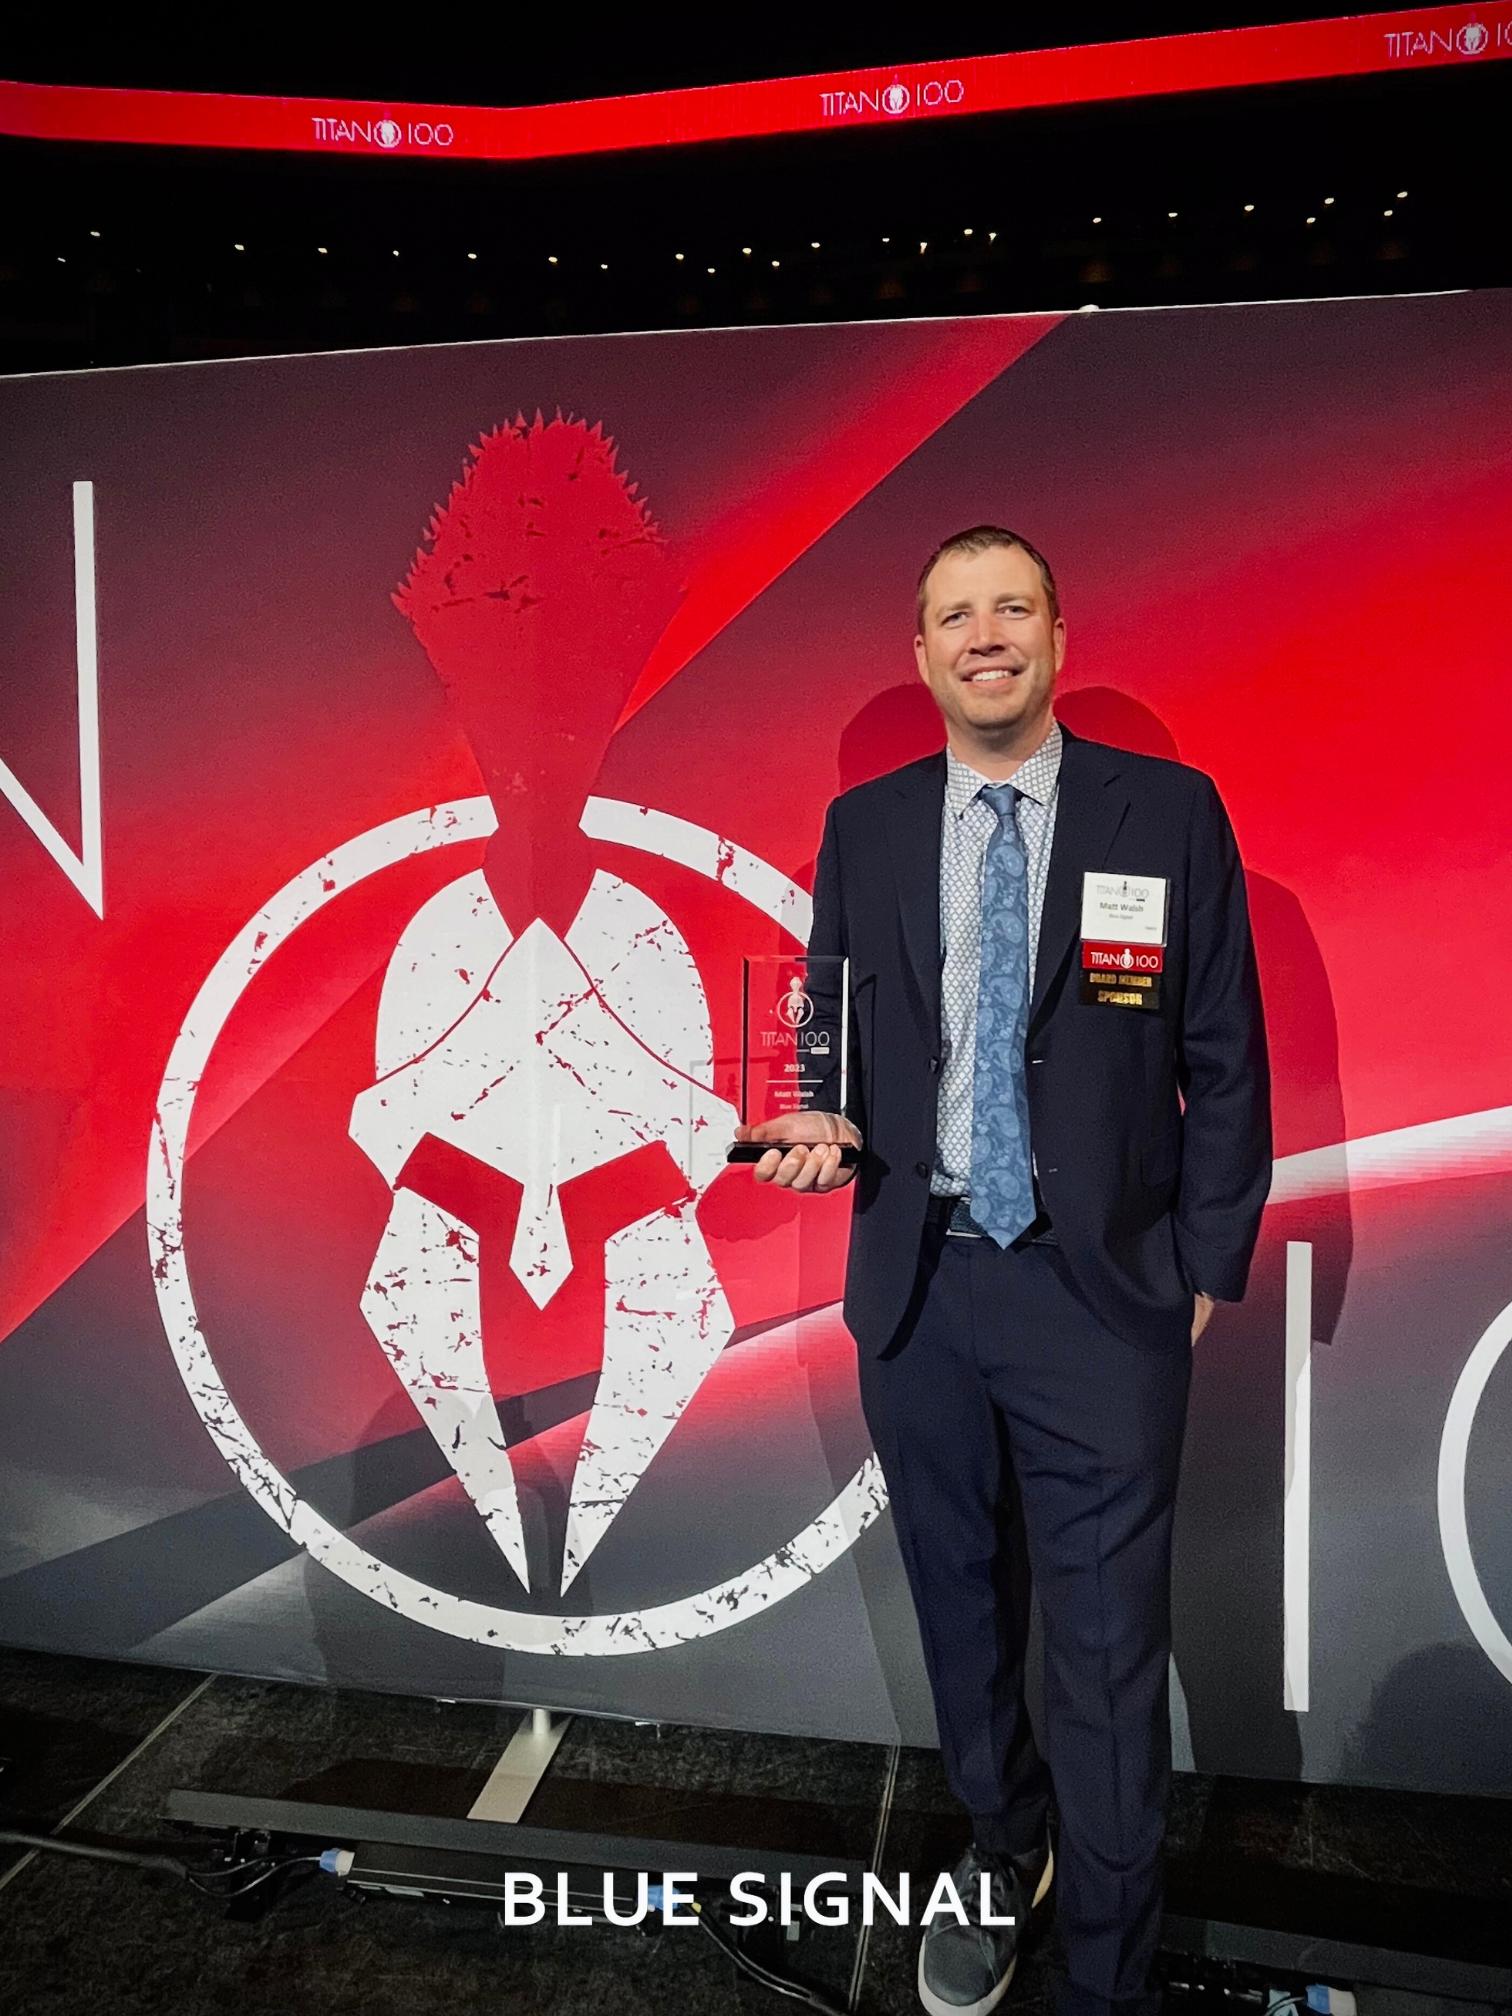 Blue Signal CEO, Matt Walsh holding his trophy at the Phoenix Titan 100 ceremony event hosted at the Desert Diamond Casino in Glendale, AZ.